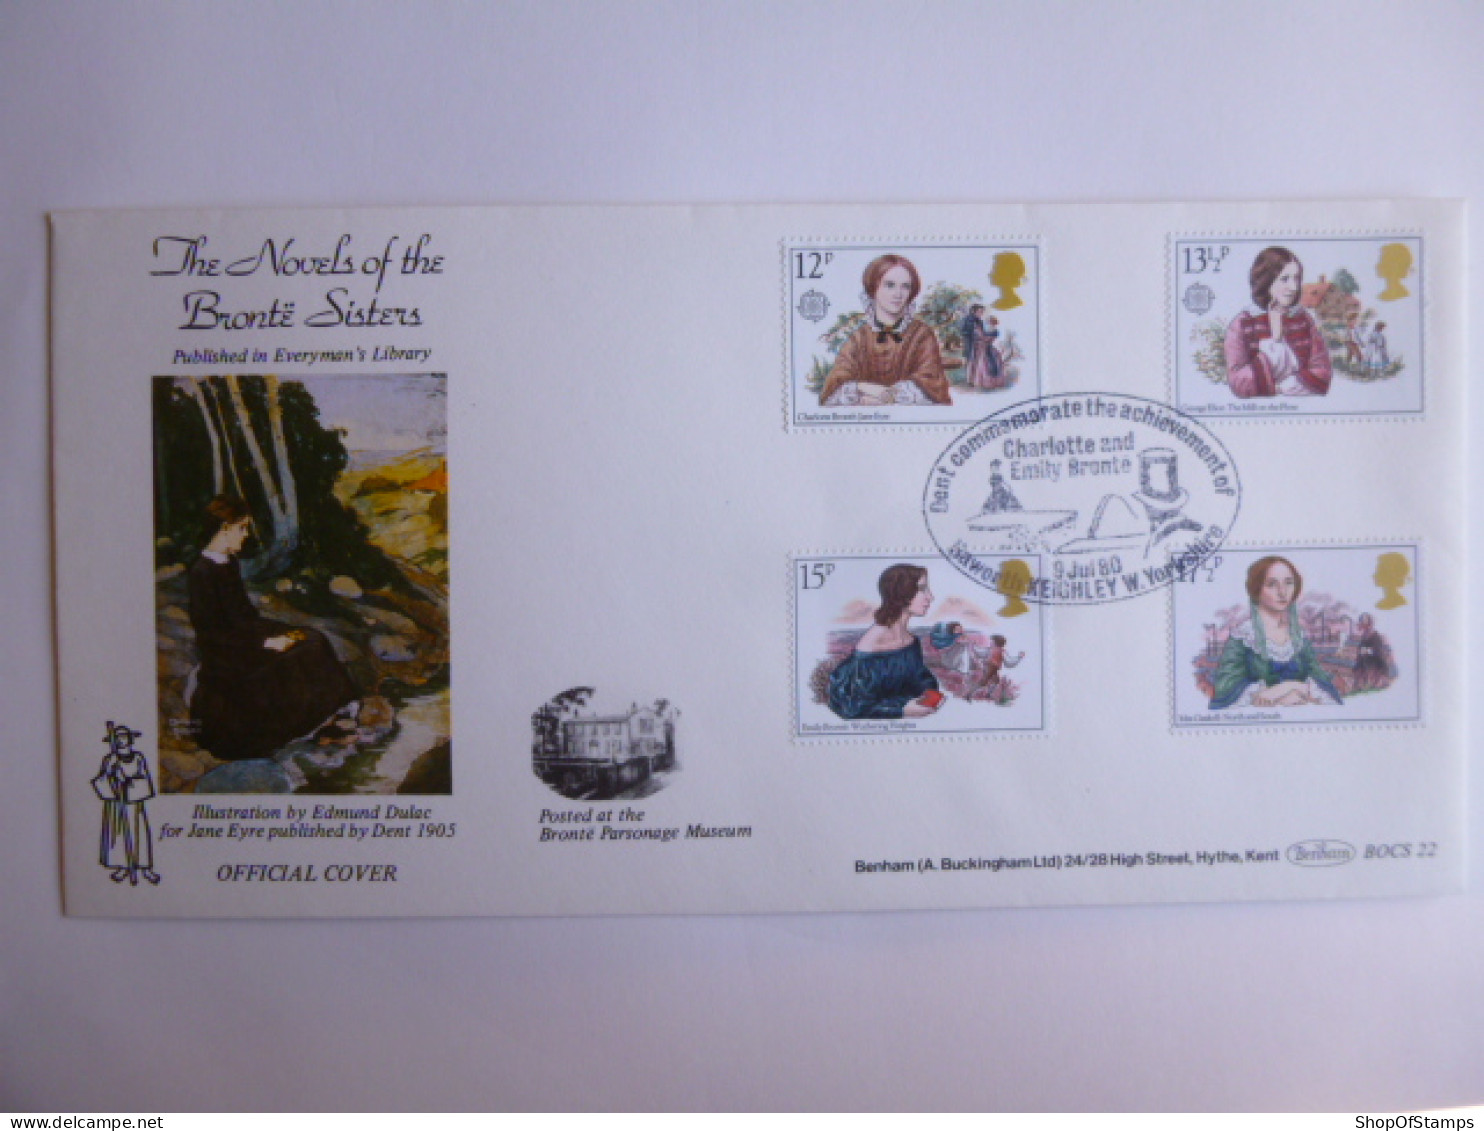 GREAT BRITAIN SG 1125-28 FAMOUS AUTHORESSES   FDC POSTED AT THE BRONTEPARSONAGE MUSEUM - Unclassified